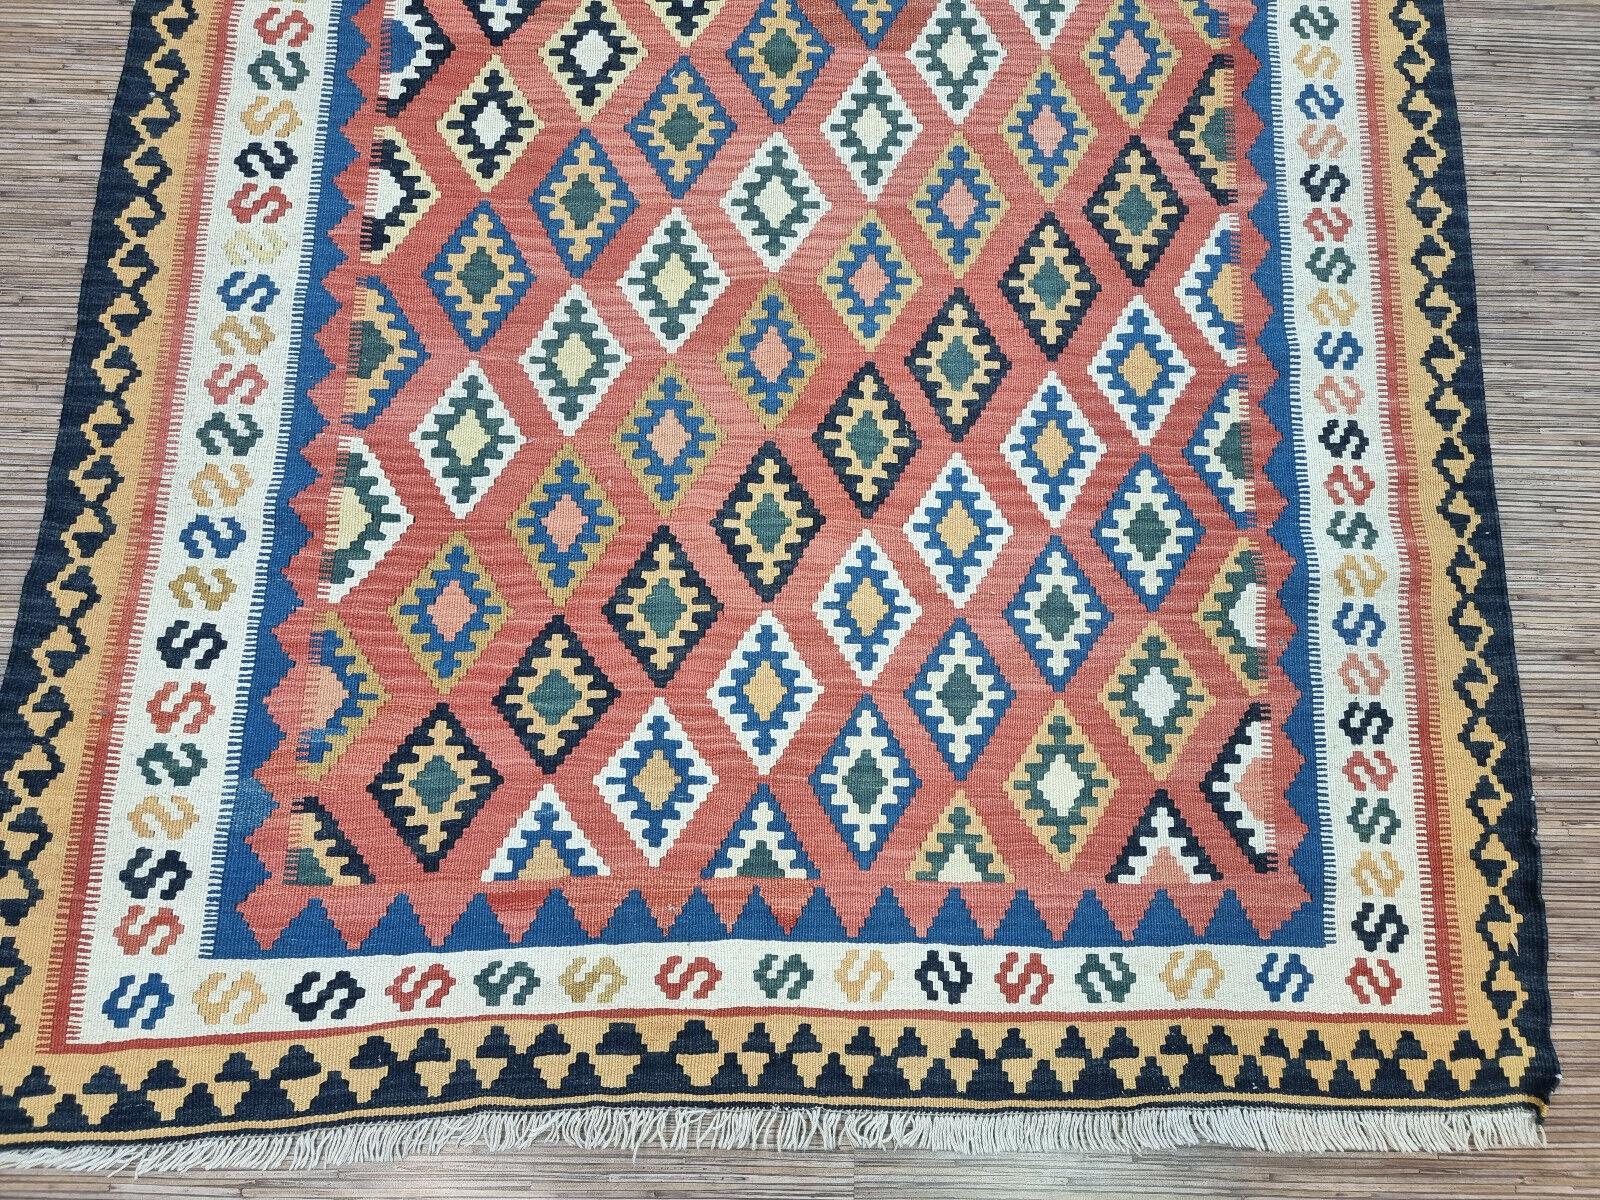 Handmade Vintage Persian Style Ardabil Kilim Rug 4.9' x 7.2', 1970s - 1D91 For Sale 1